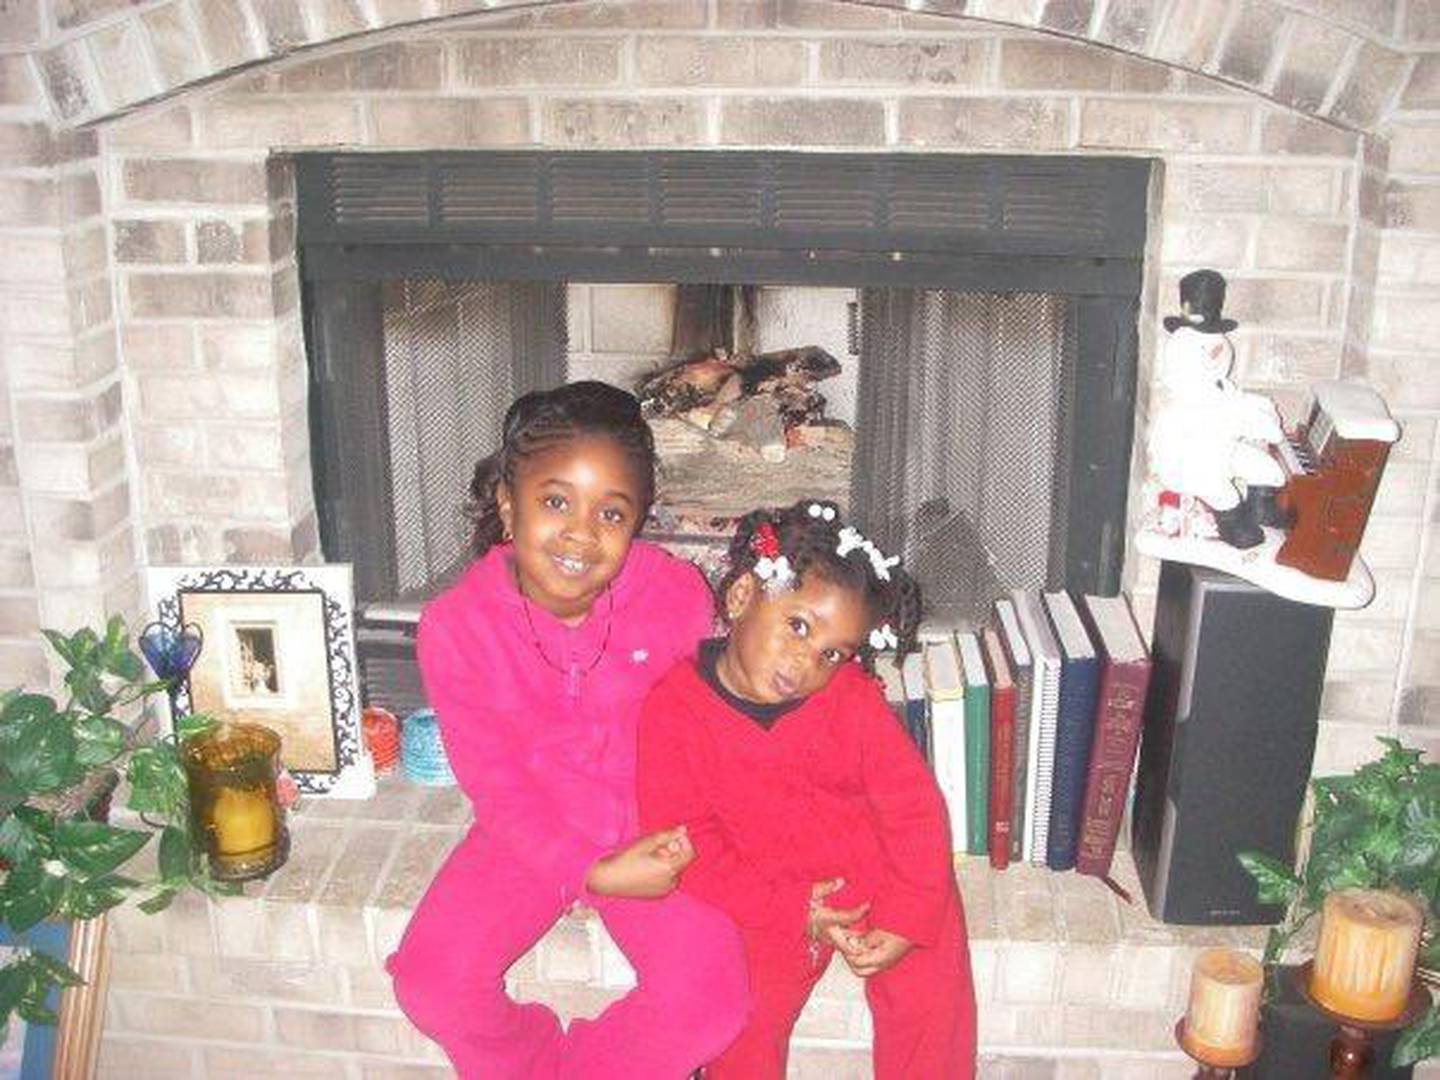 Dykota Morgan, 15, of Bolingbrook was an athlete, artist, activist and scholar. She died of complications from COVID-19 on May 4. She is pictured in her younger years with her older sister Dyman.